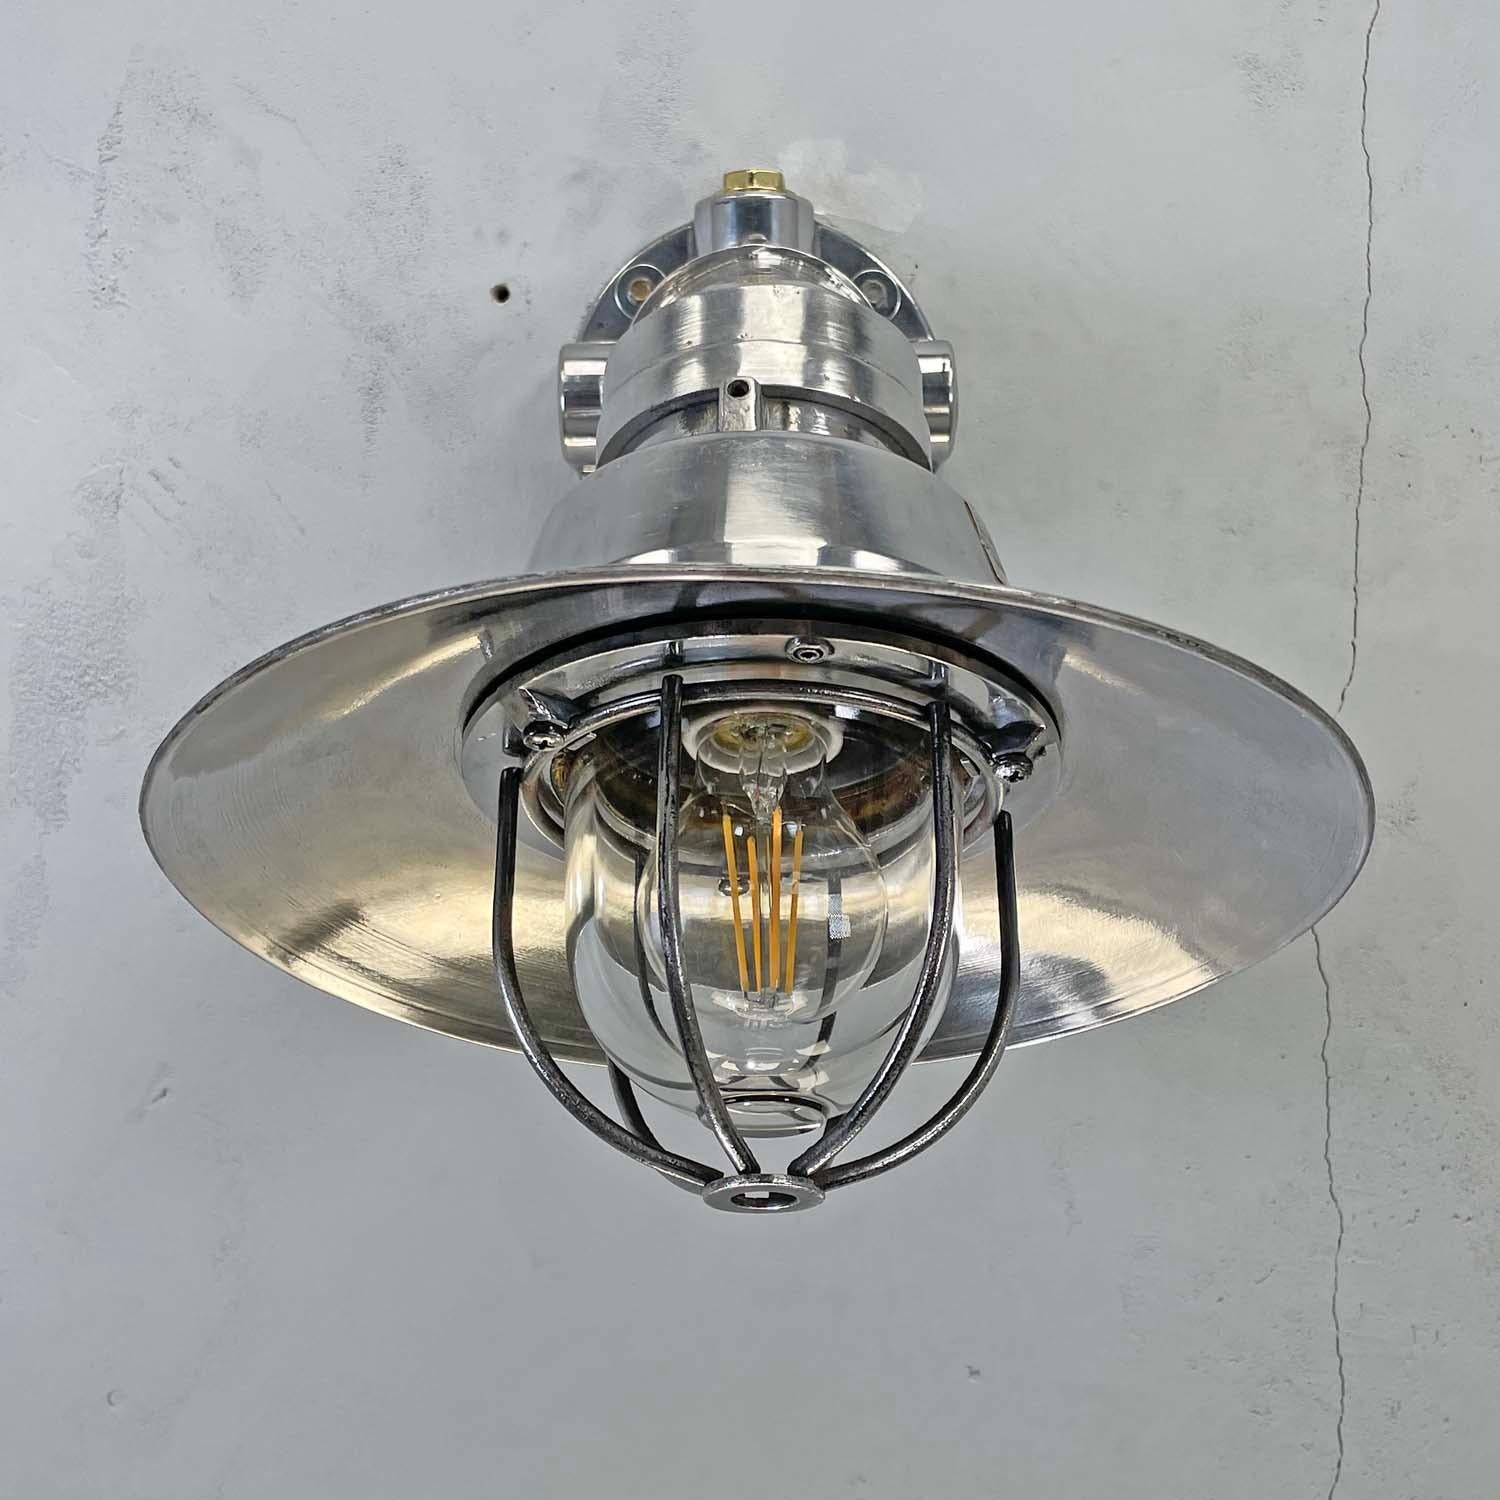 Vintage industrial cast aluminium cantilever wall lighting with tempered glass dome, cage and aluminum shade. Add a touch of the industrial to your interior with these large metal wall light fixtures. Reclaimed from Cargo ships and super tankers